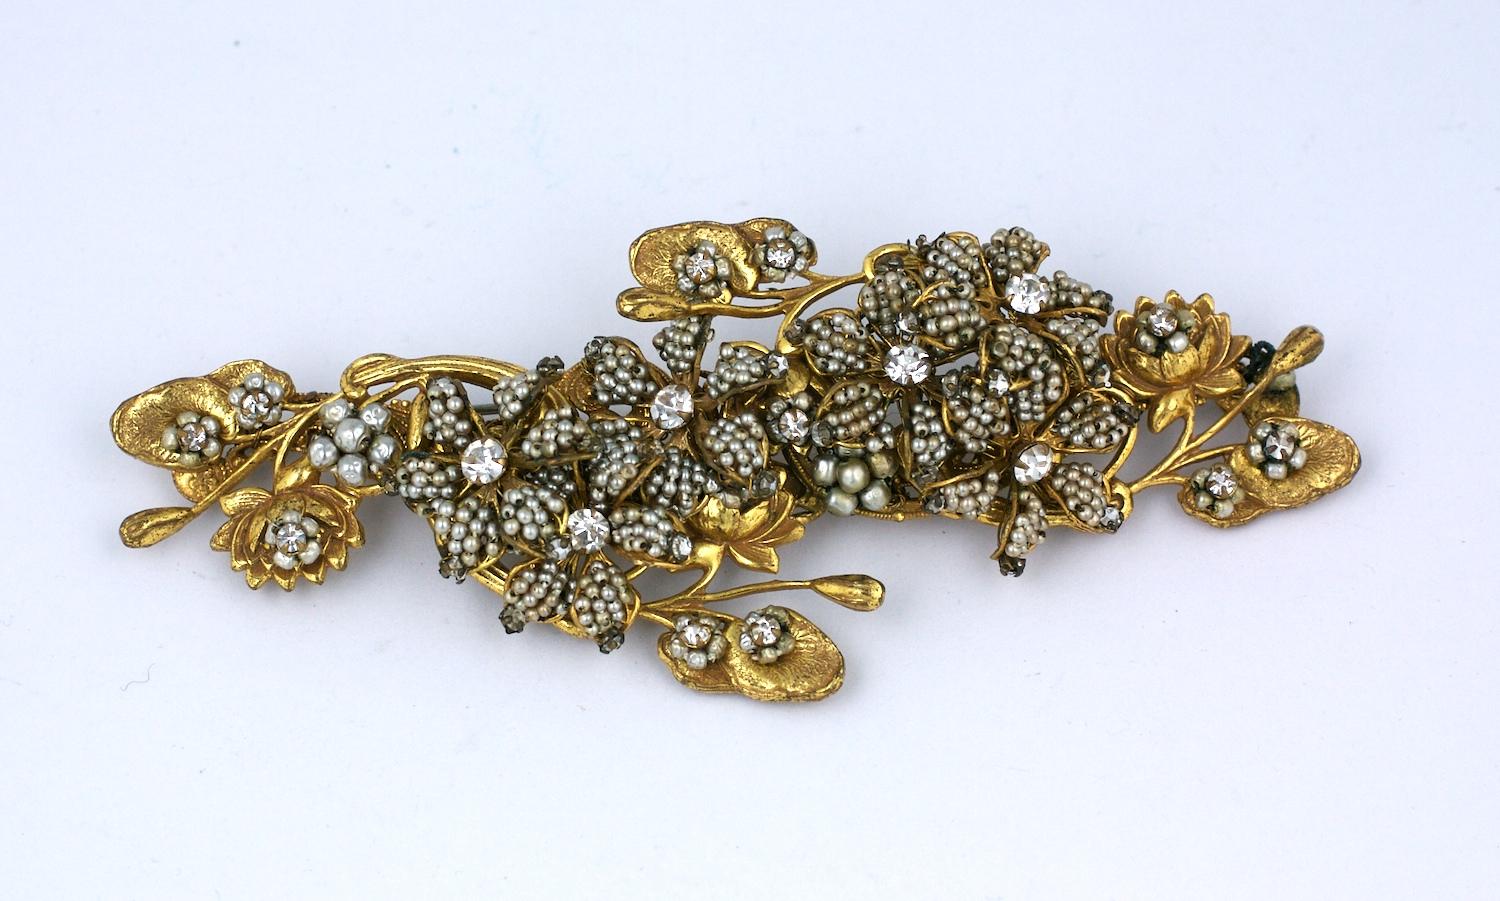 Micro Bead Large Miriam Haskell Pearl Brooch In Excellent Condition For Sale In New York, NY